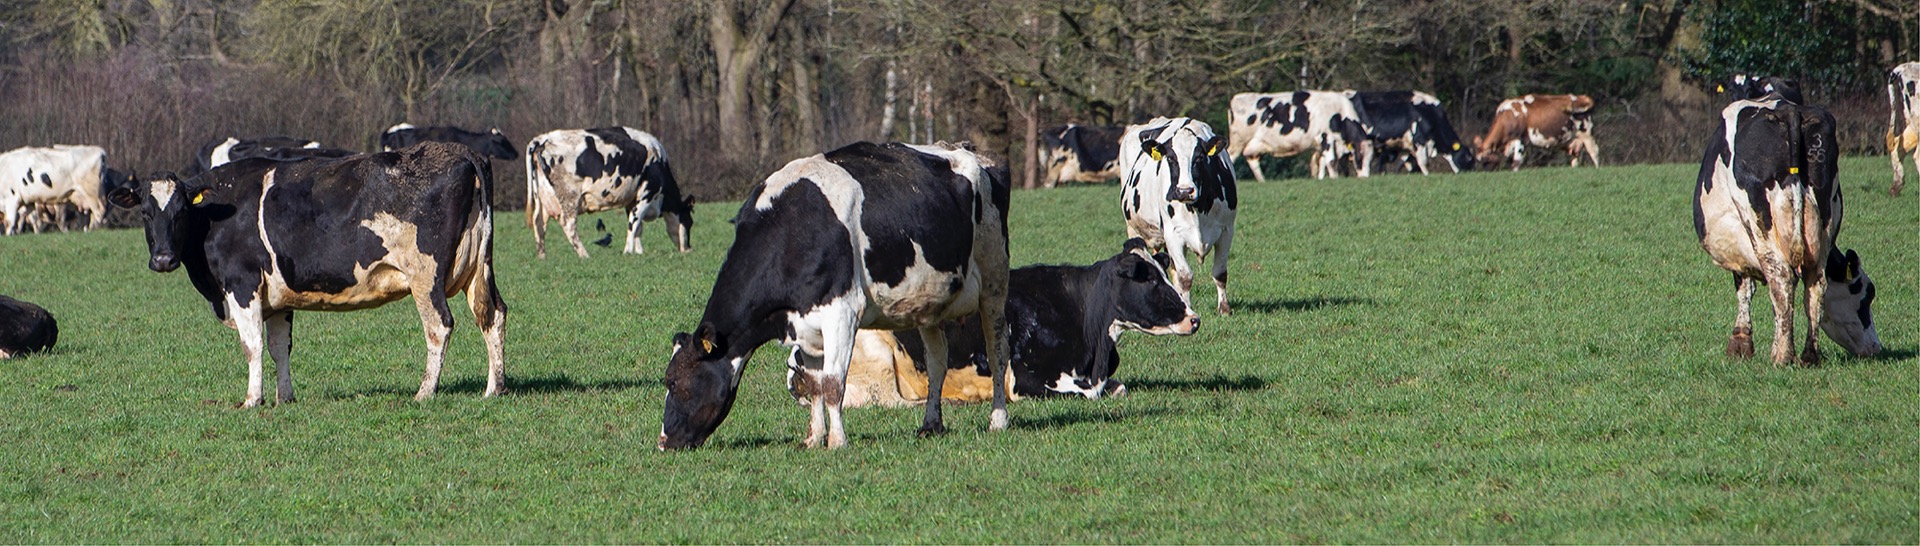 Video: Managing calf rearing - from birth to weaning